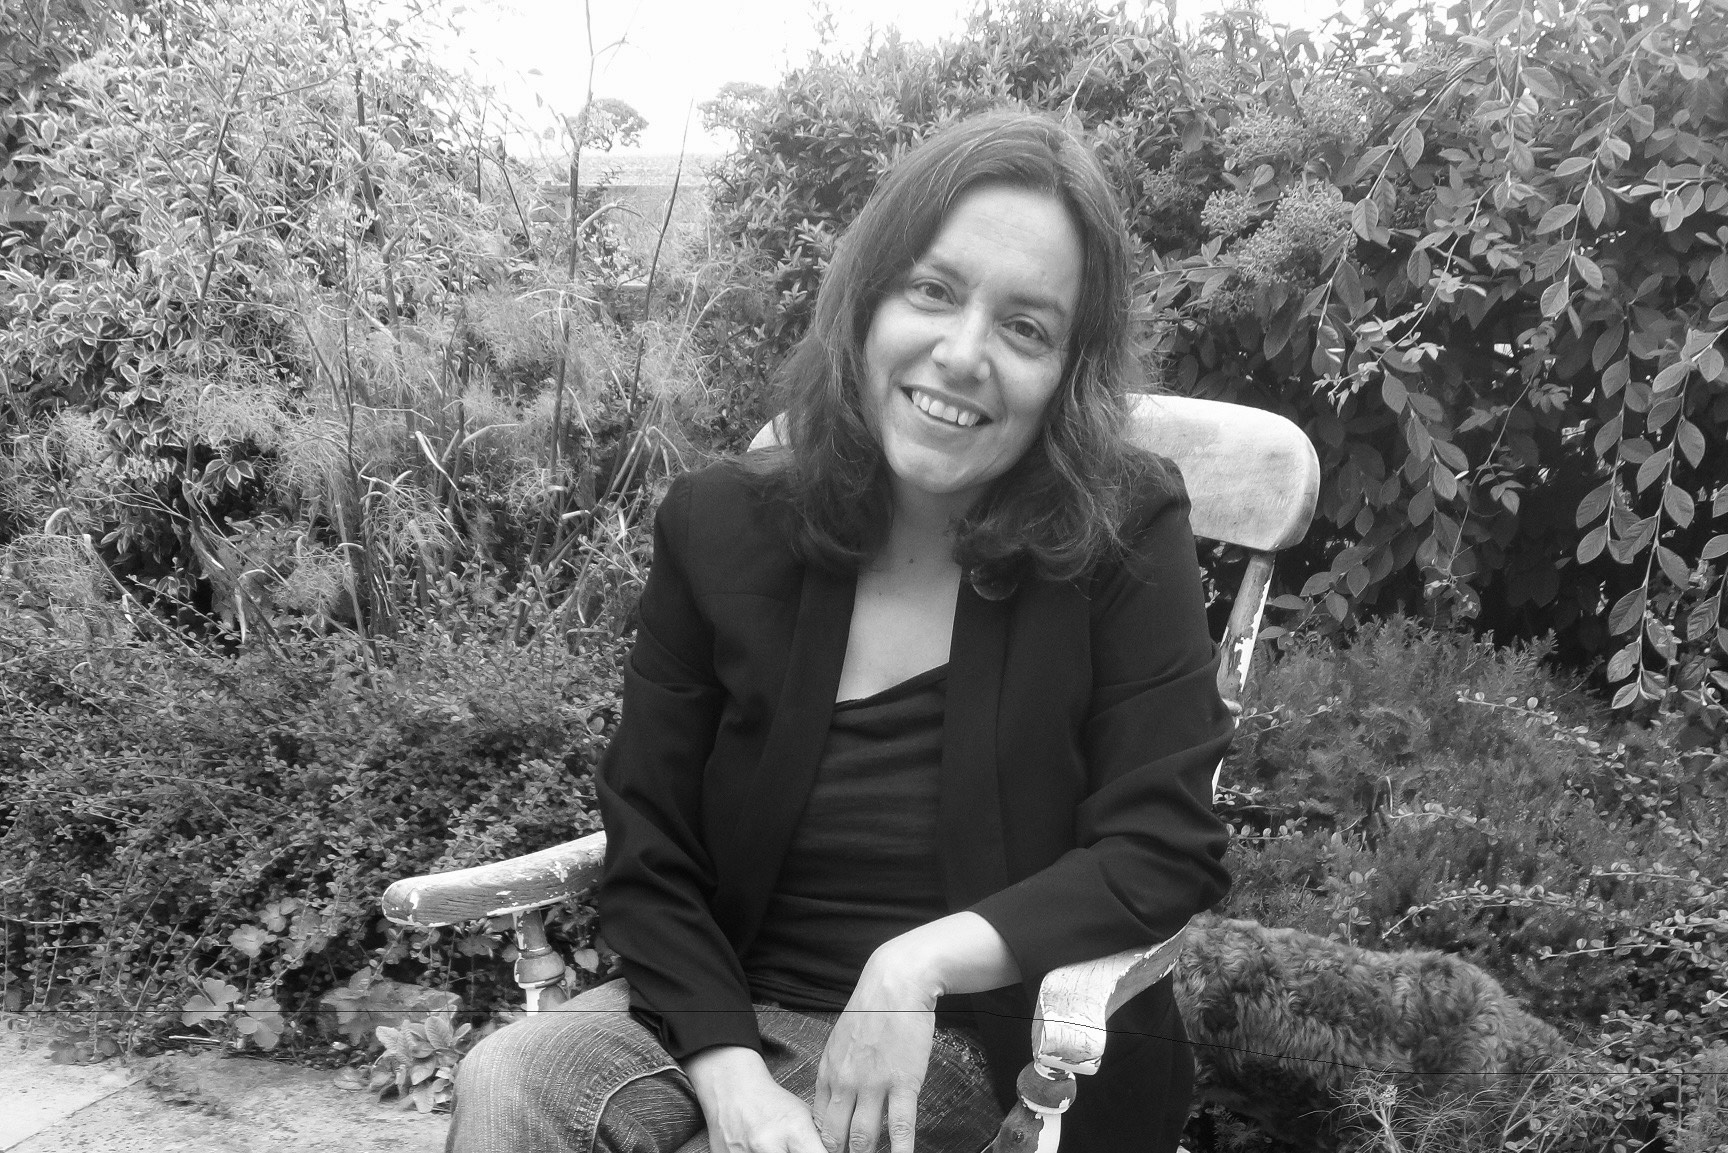 A black and white photograph shows Sara Ahmed sitting in an antique, distressed chair situated outside in front of some foliage. She is wearing jeans and a blazer, her slightly wavy hair falling just past her shoulders. She leans toward the camera, one elbow resting on the arm of her chair, and smiles kindly.